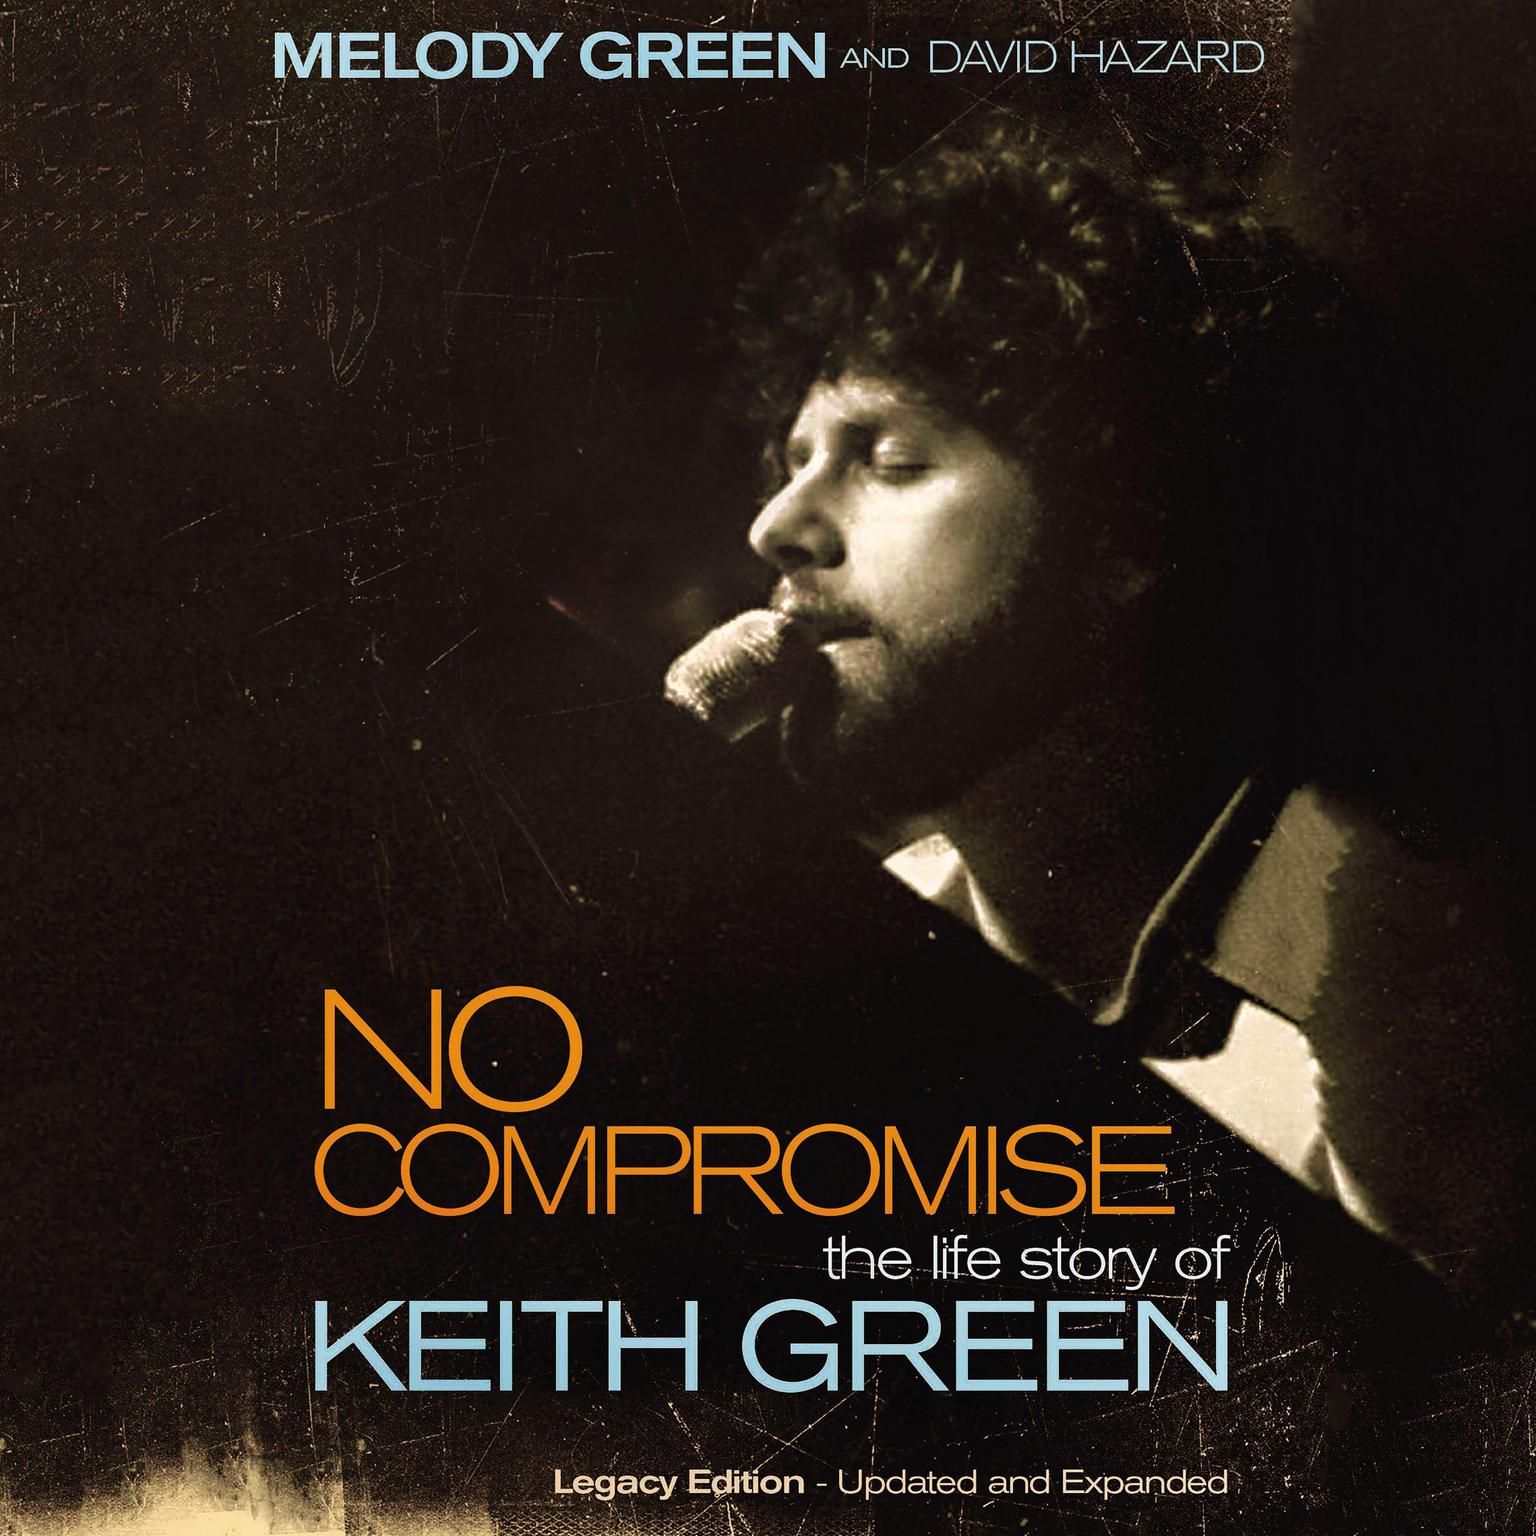 No Compromise: The Life Story of Keith Green Audiobook, by Melody Green